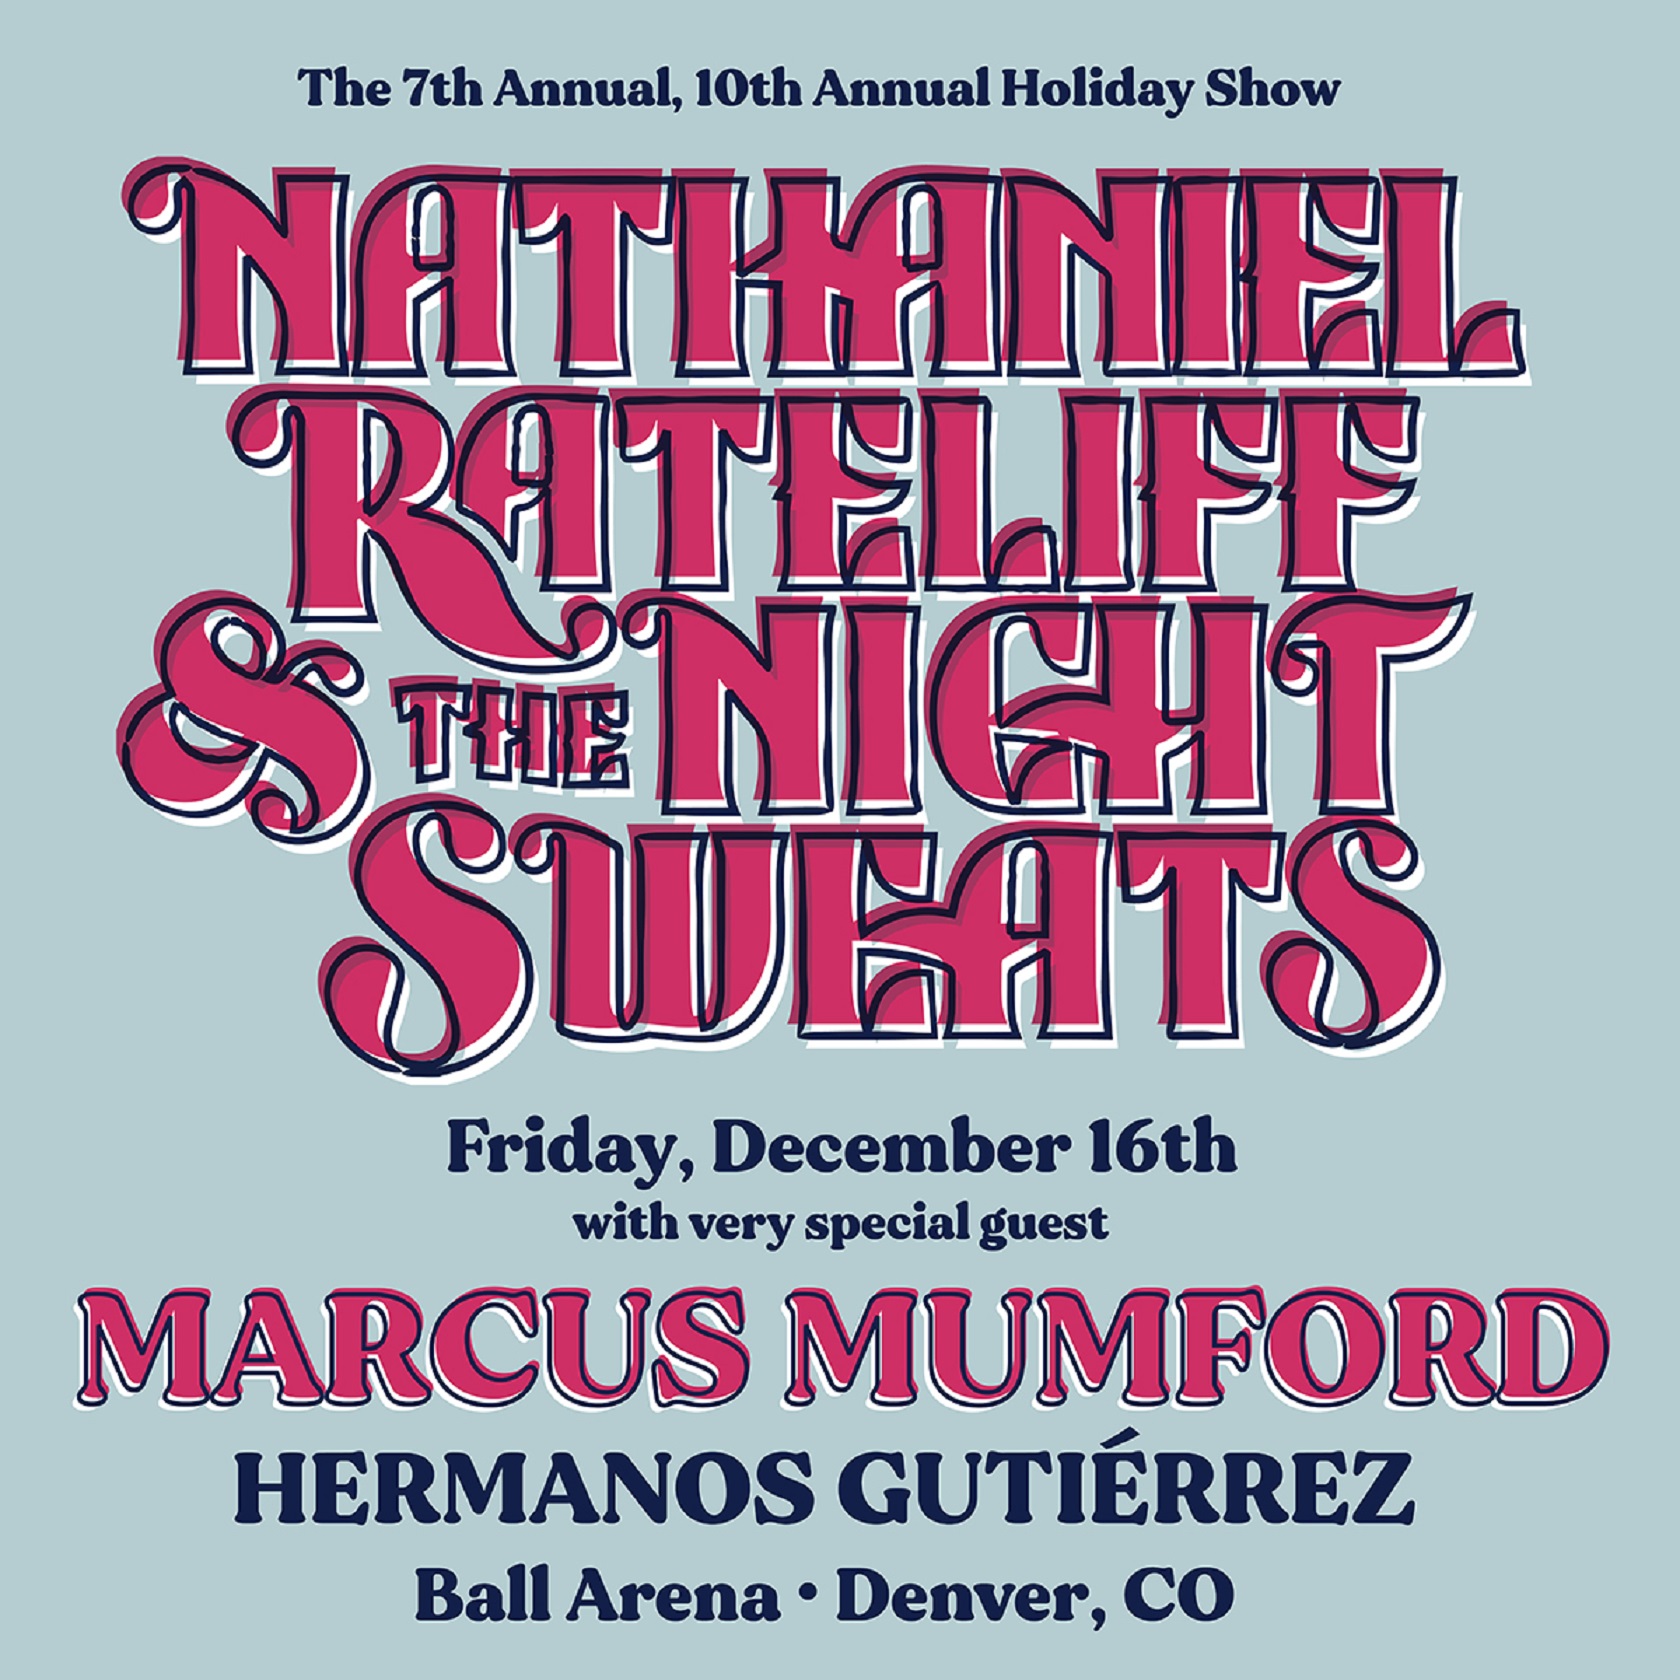 Nathaniel Rateliff & The Night Sweats confirms Seventeenth Annual Holiday Show in Denver on December 16